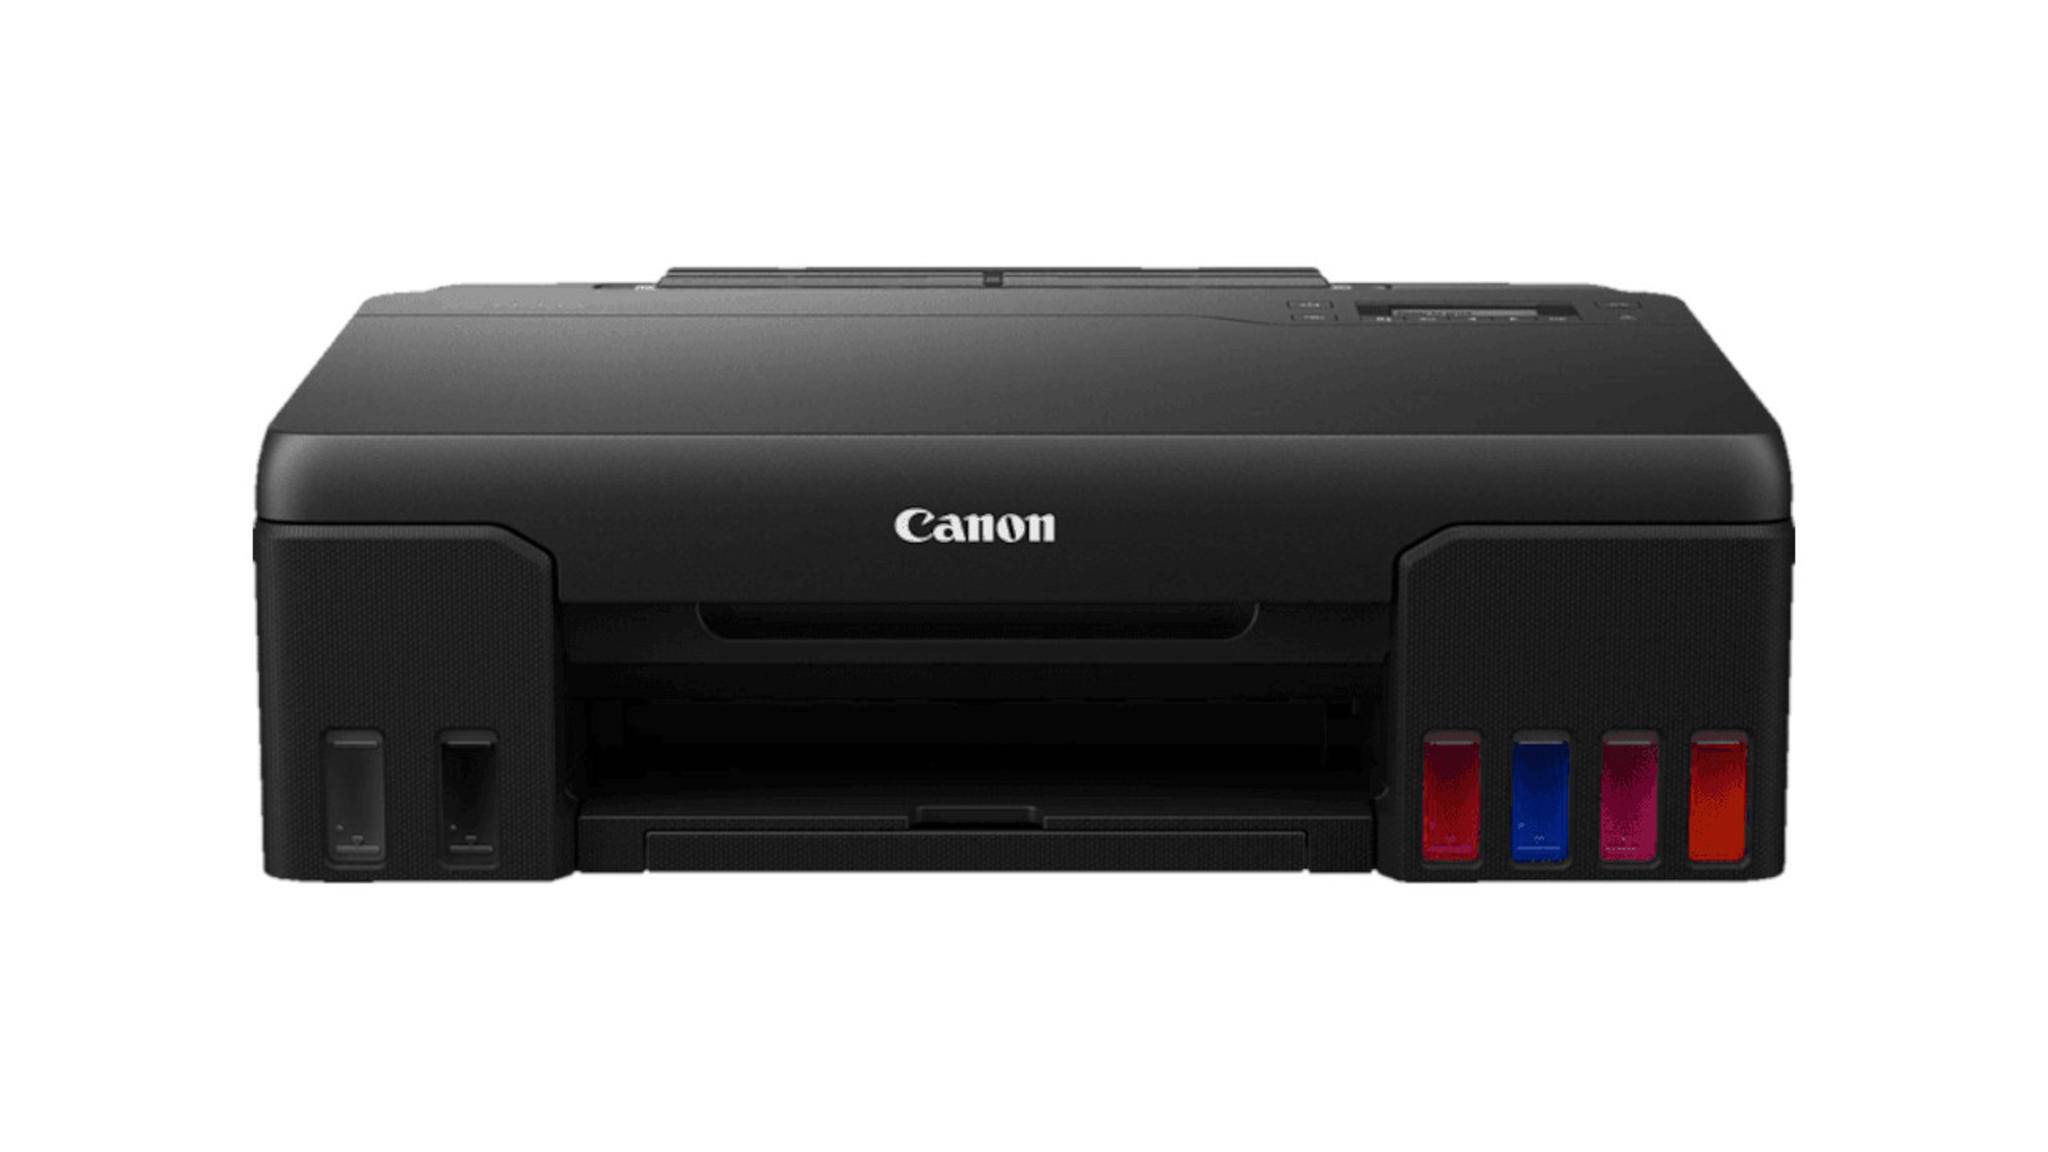 The Canon Pixma G550 is a real bargain considering the equipment and photo quality.